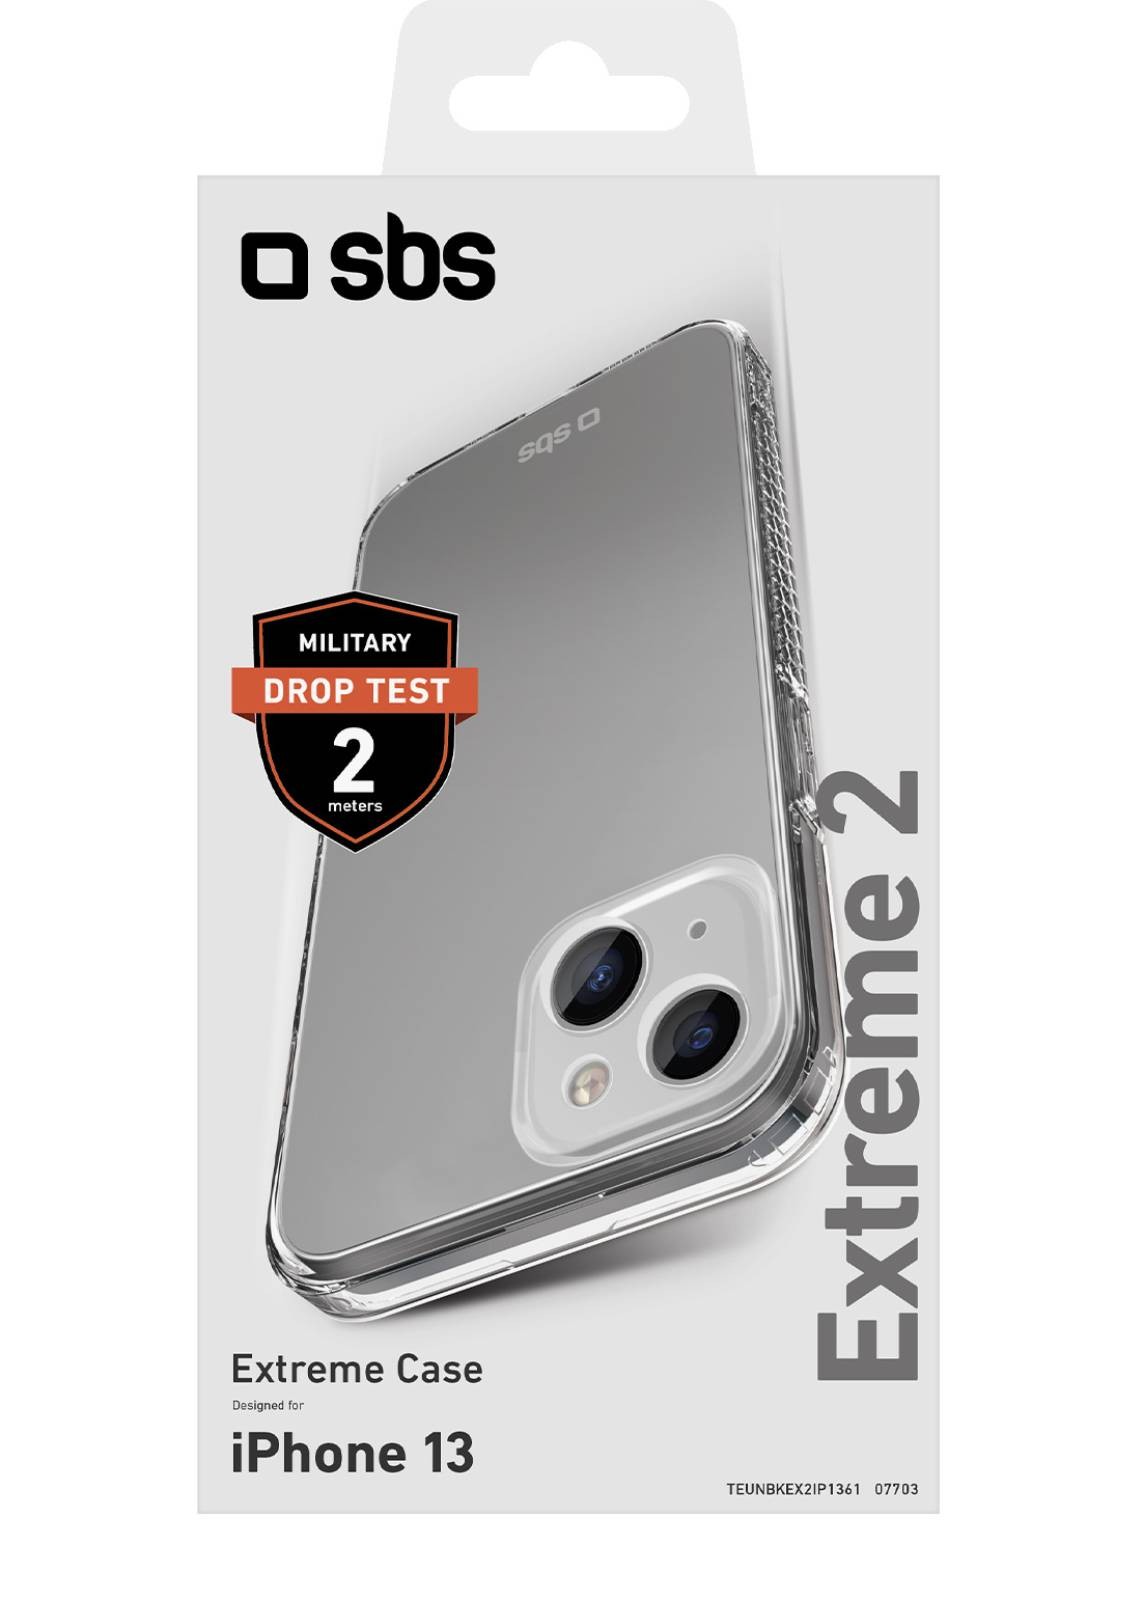 SBS Coque iPhone  Extreme X2 pour iPhone 13 - COQ-EXTRX2-IPHONE13